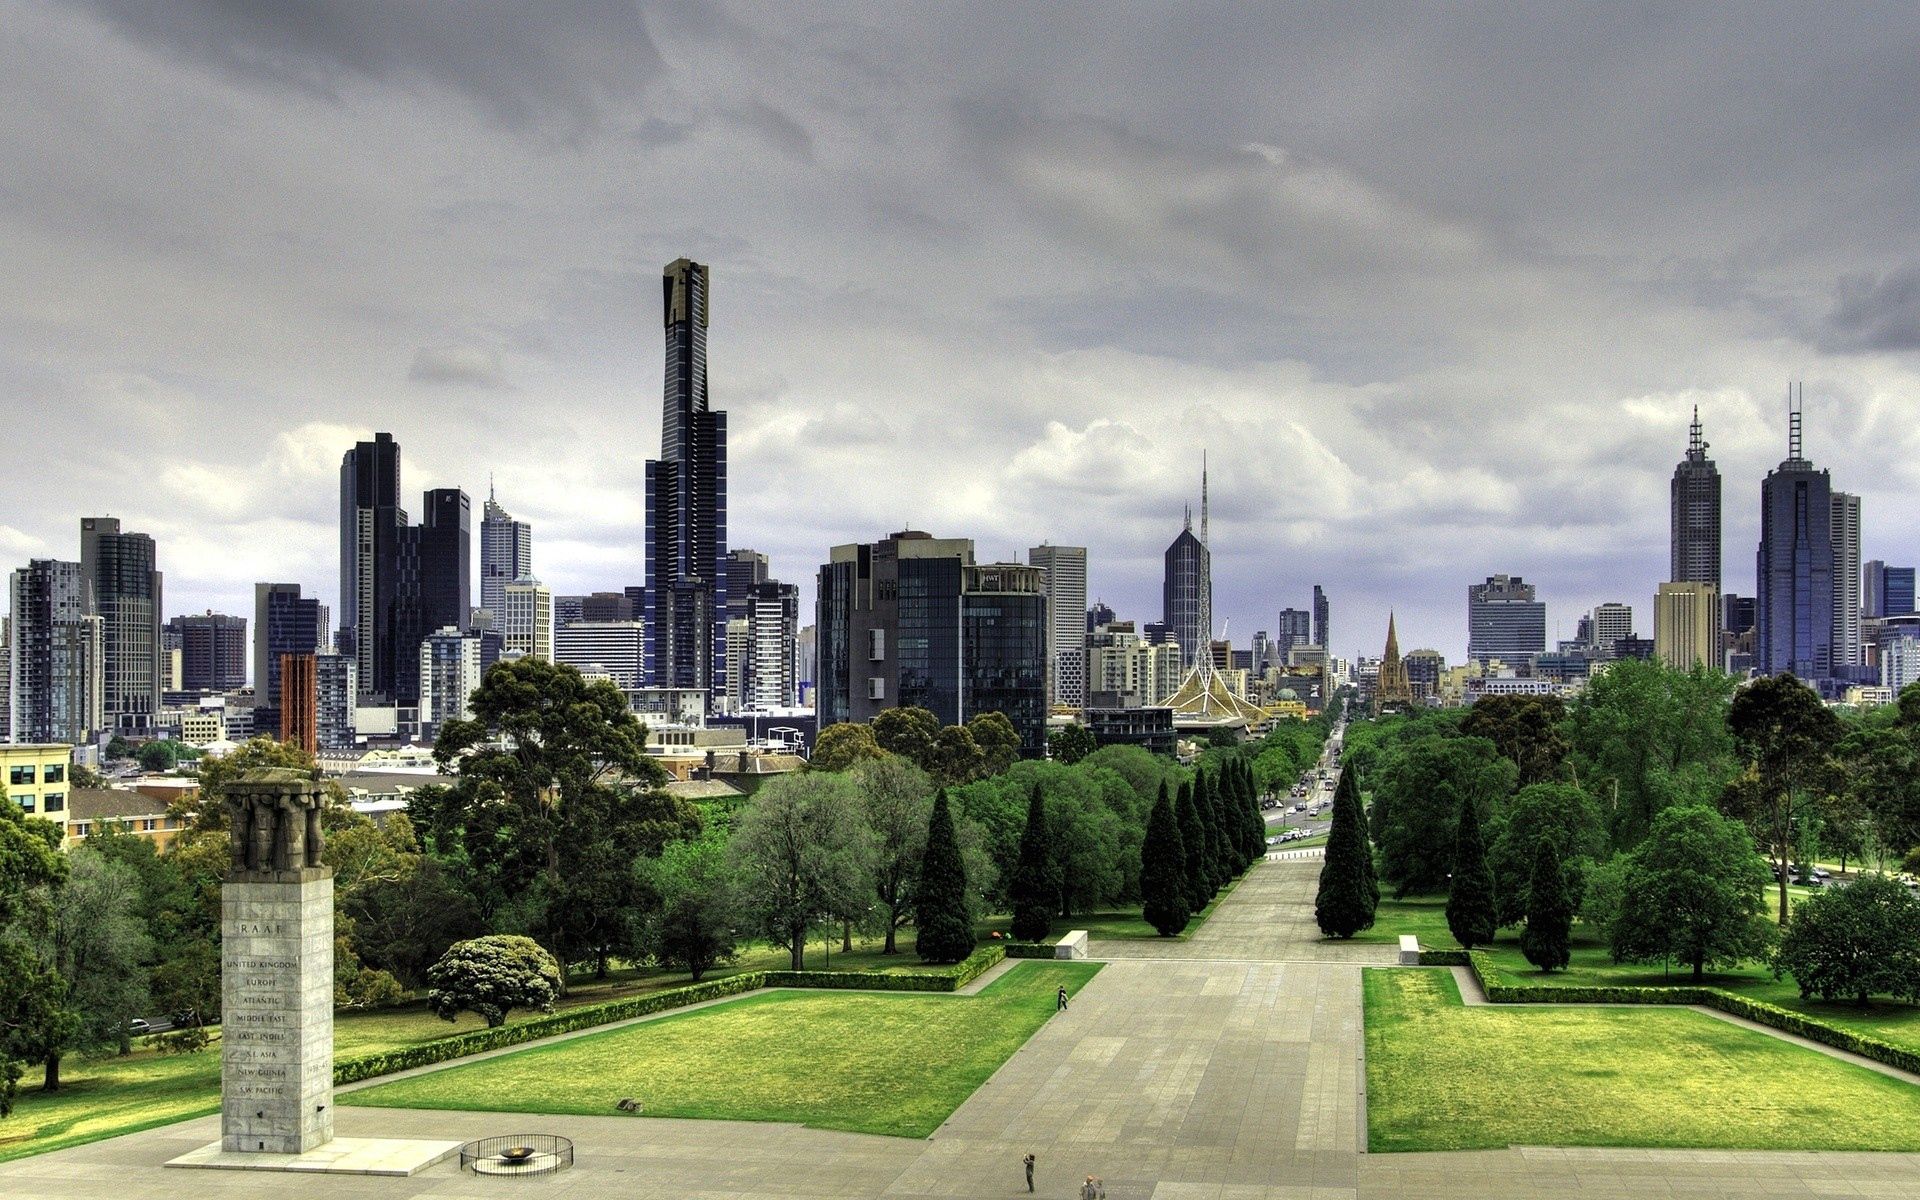 stroll, park, australia, cities, handsomely, nature, building, skyscrapers, it's beautiful, melbourne